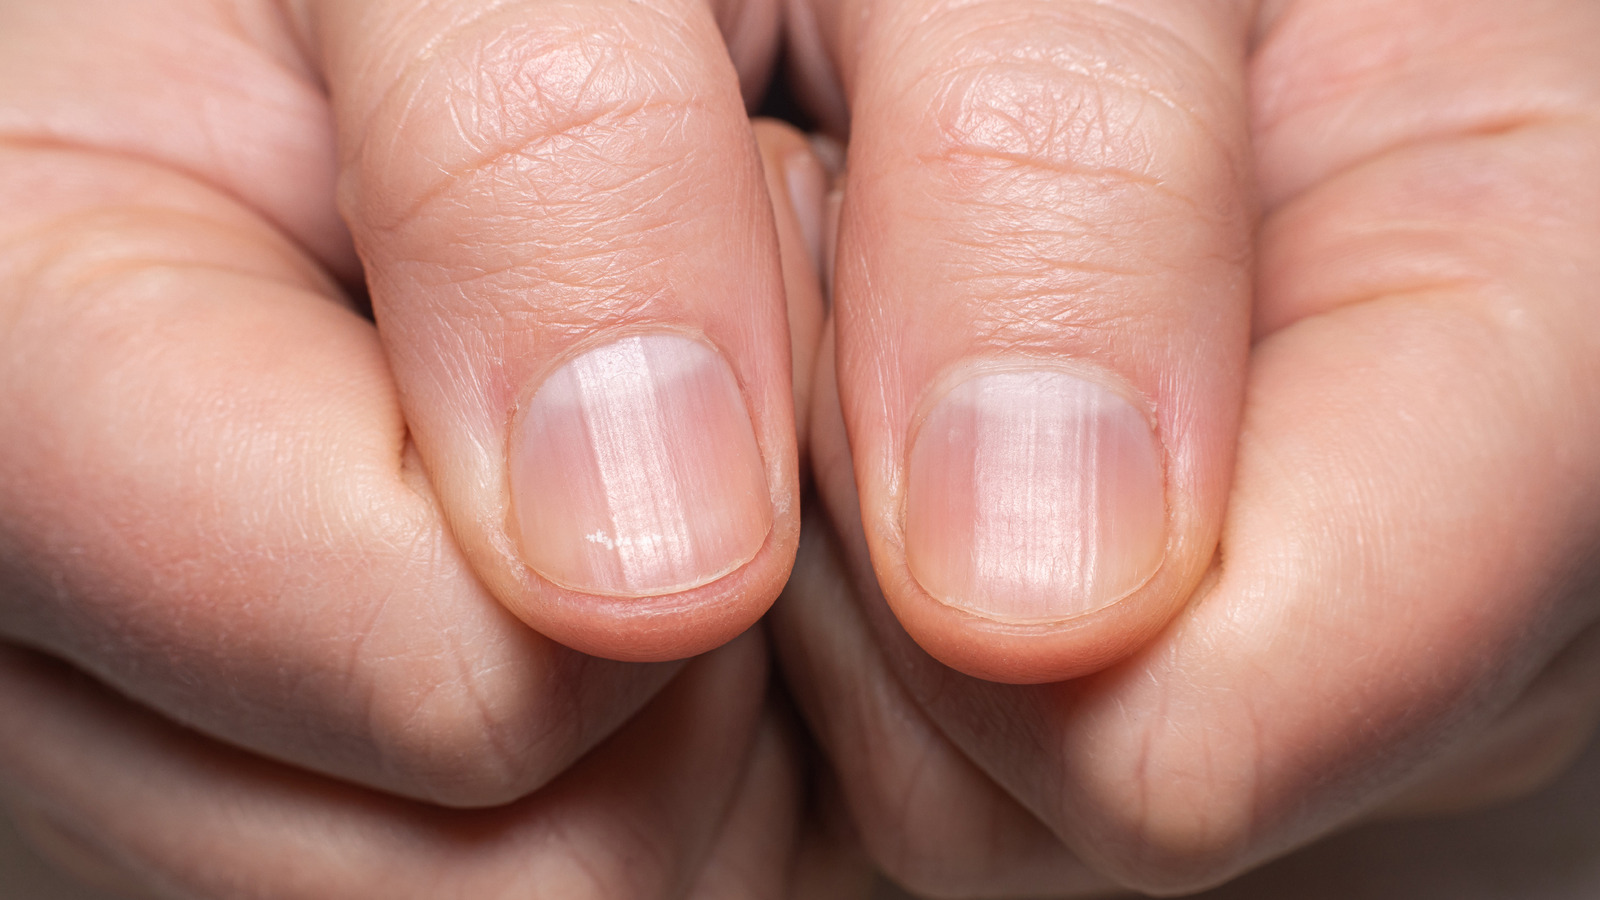 It seems like my fingernails grow after swimming. Does that happen? - Quora